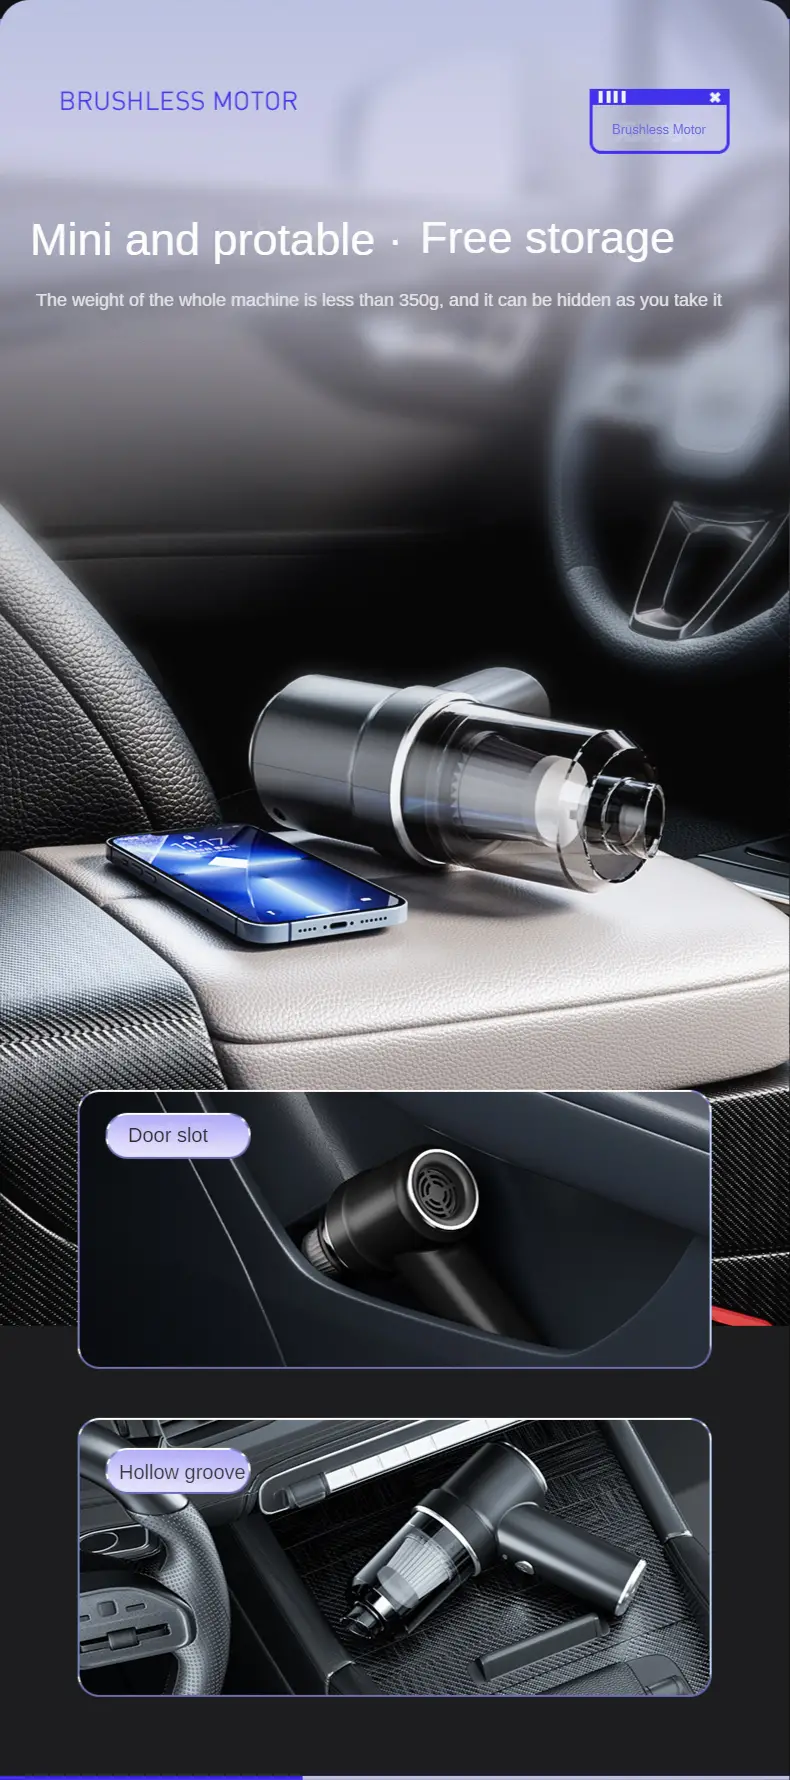 20000pa brushless brush motor car vacuum cleaner for car wireless handheld vacuum with blow dust portable vacuum cleaner for car home black color details 7